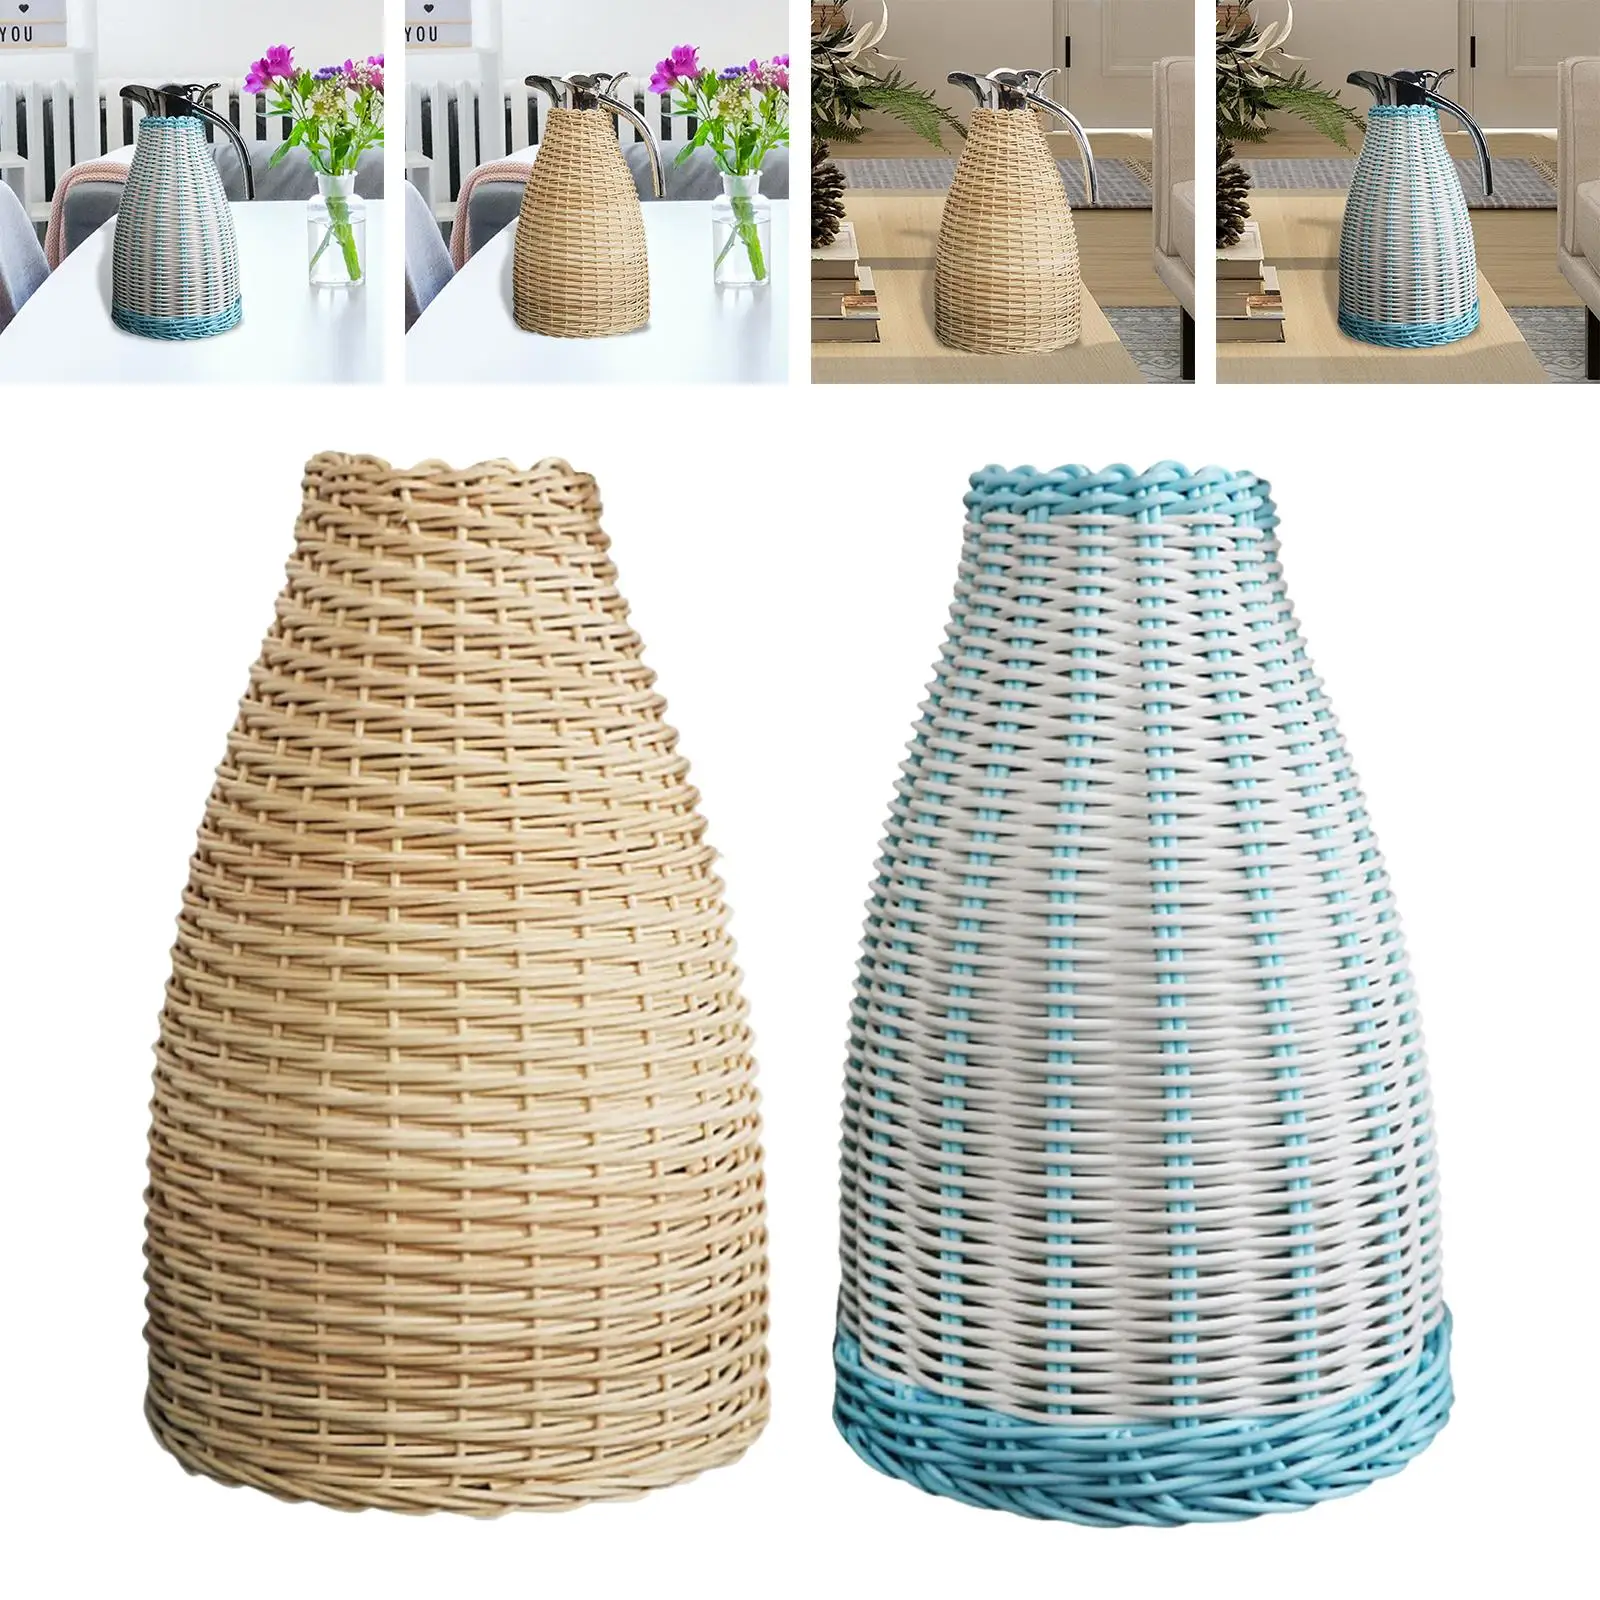 Bottle slings Holder Thermal Jug Decorative Rustic Vacuum Thermal jug Protector Water Bottle pouch for Chairs Driveways Hotels